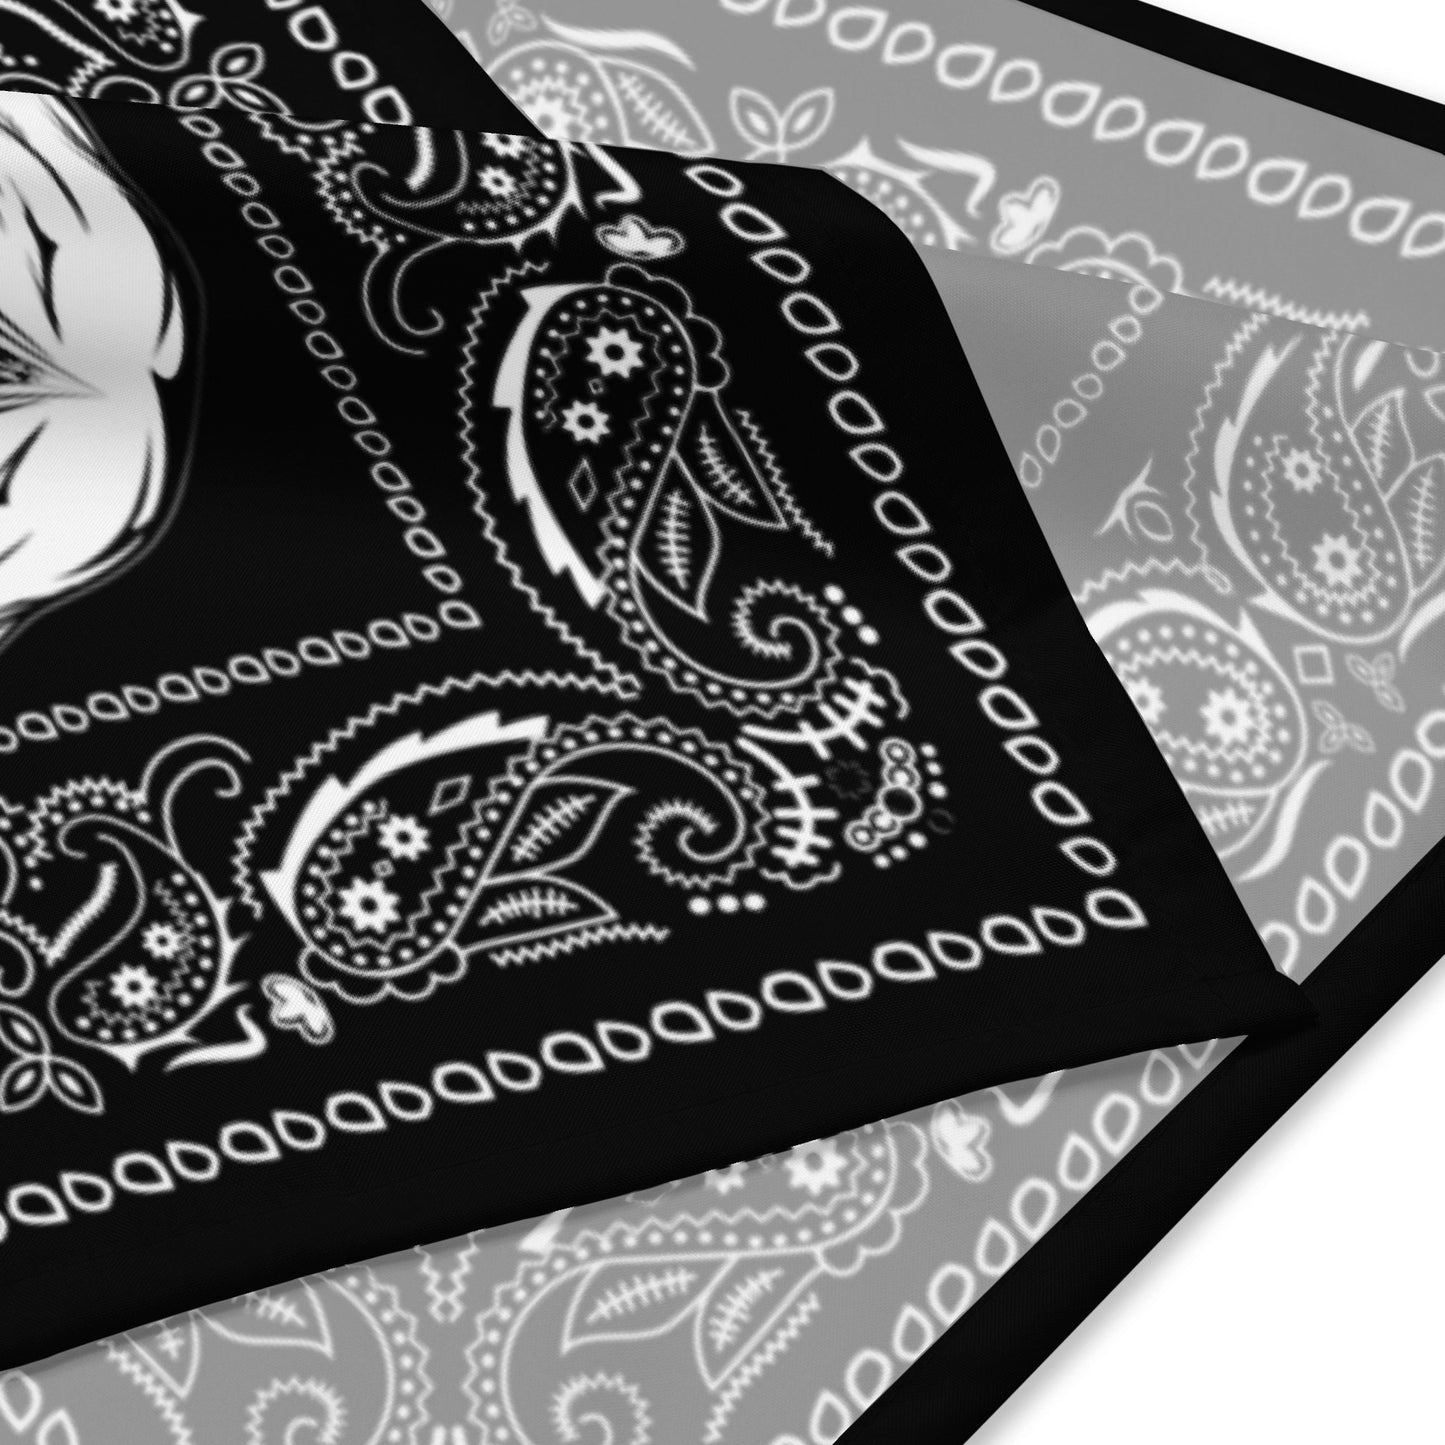 Black Bandana with Skulls and  Paisley Border, Head Wrap for Rockers or Neck Scarf for a Goth Costume